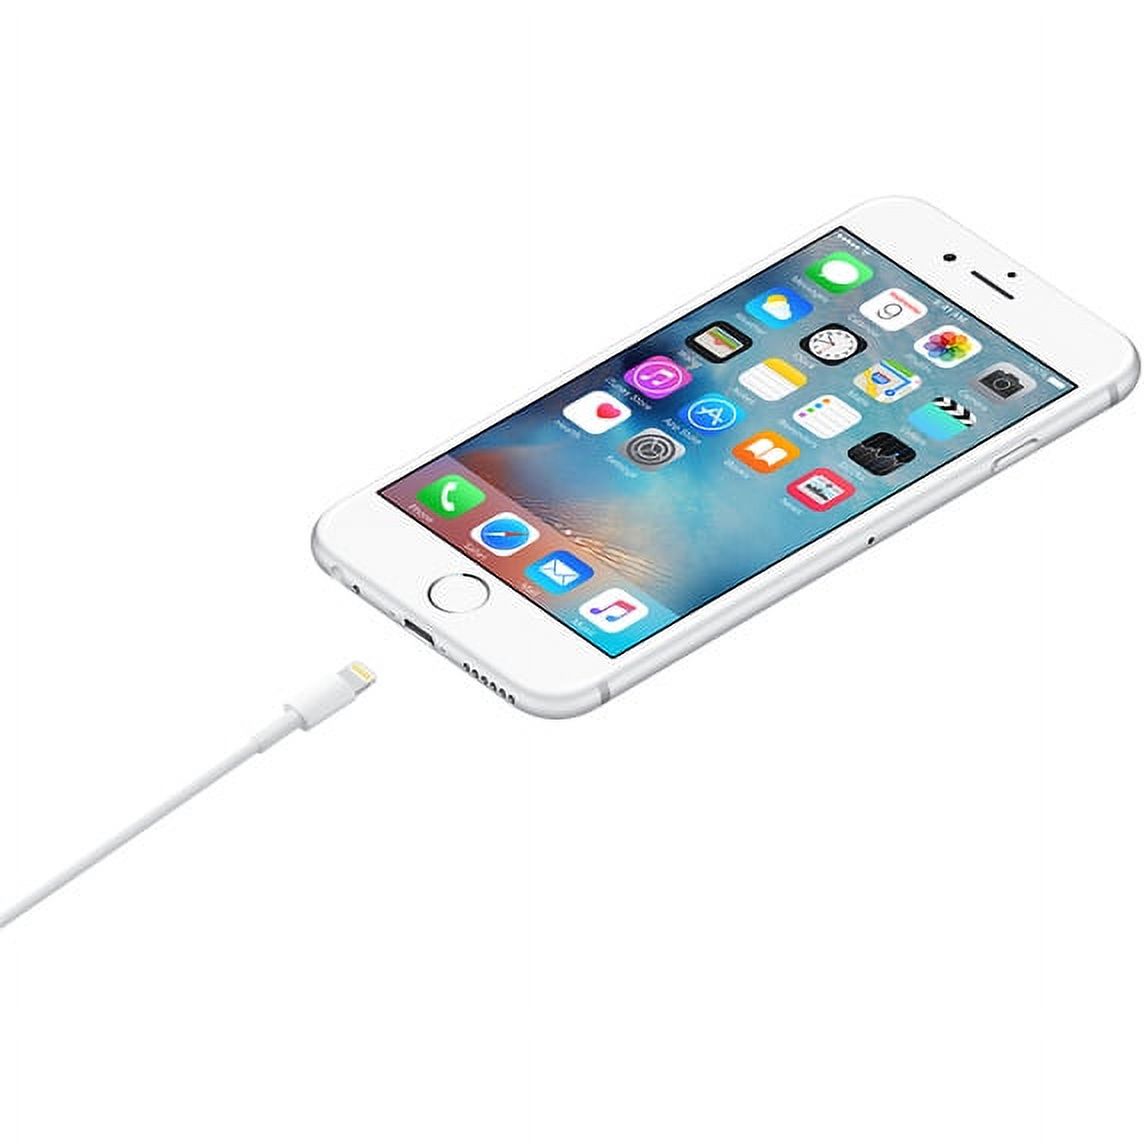 Apple USB-A to Lightning Cable for iPhone, iPad, Airpods, iPod - 6.6ft or 2m - image 2 of 4